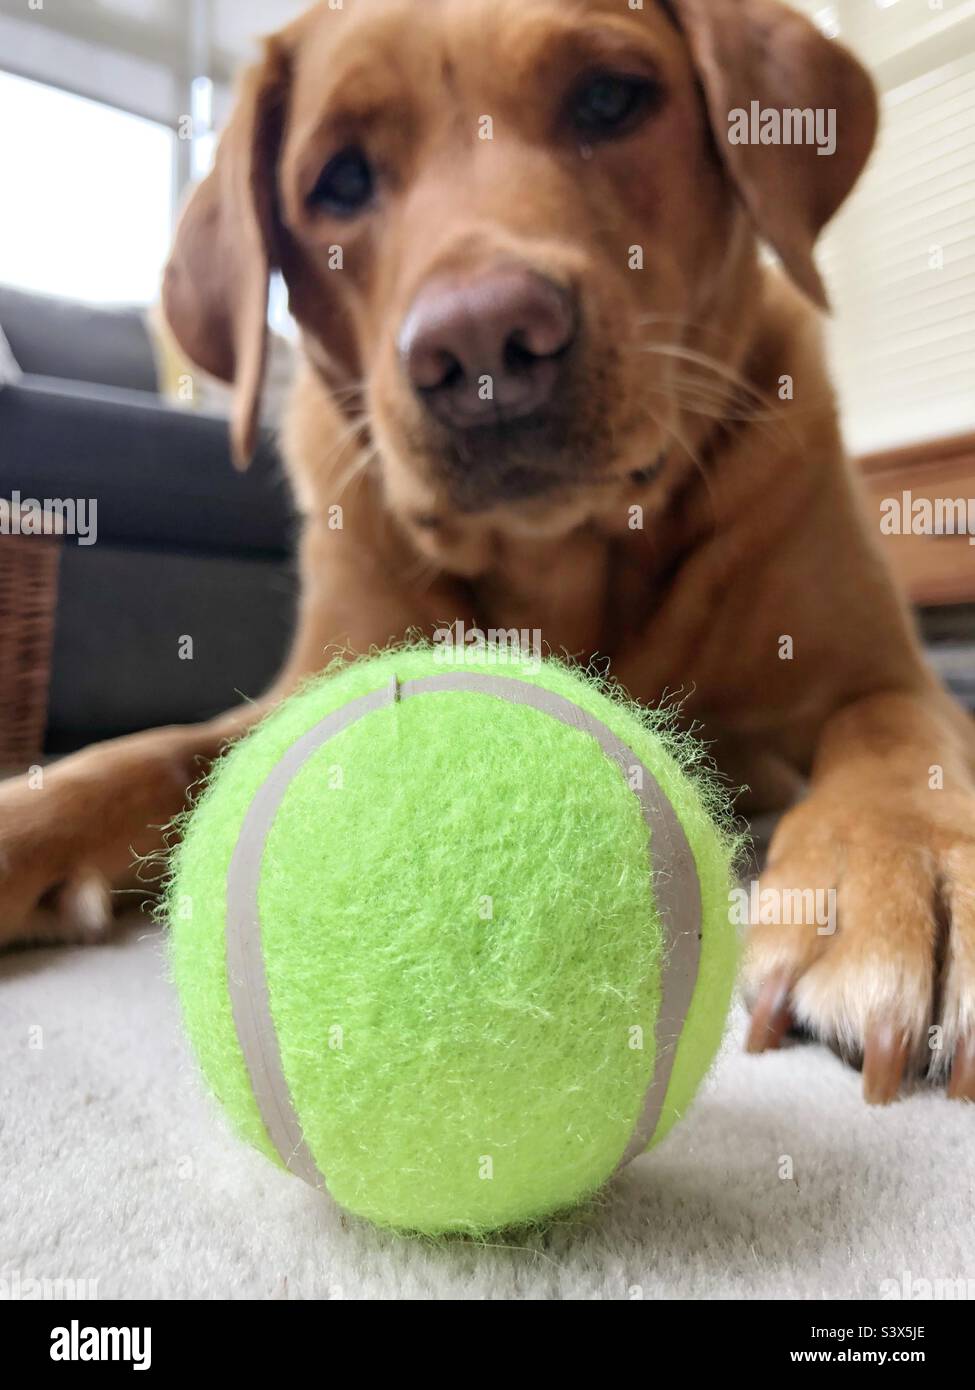 Close up of a Labrador dog hypnotised by a ball n a funny pet image Stock Photo